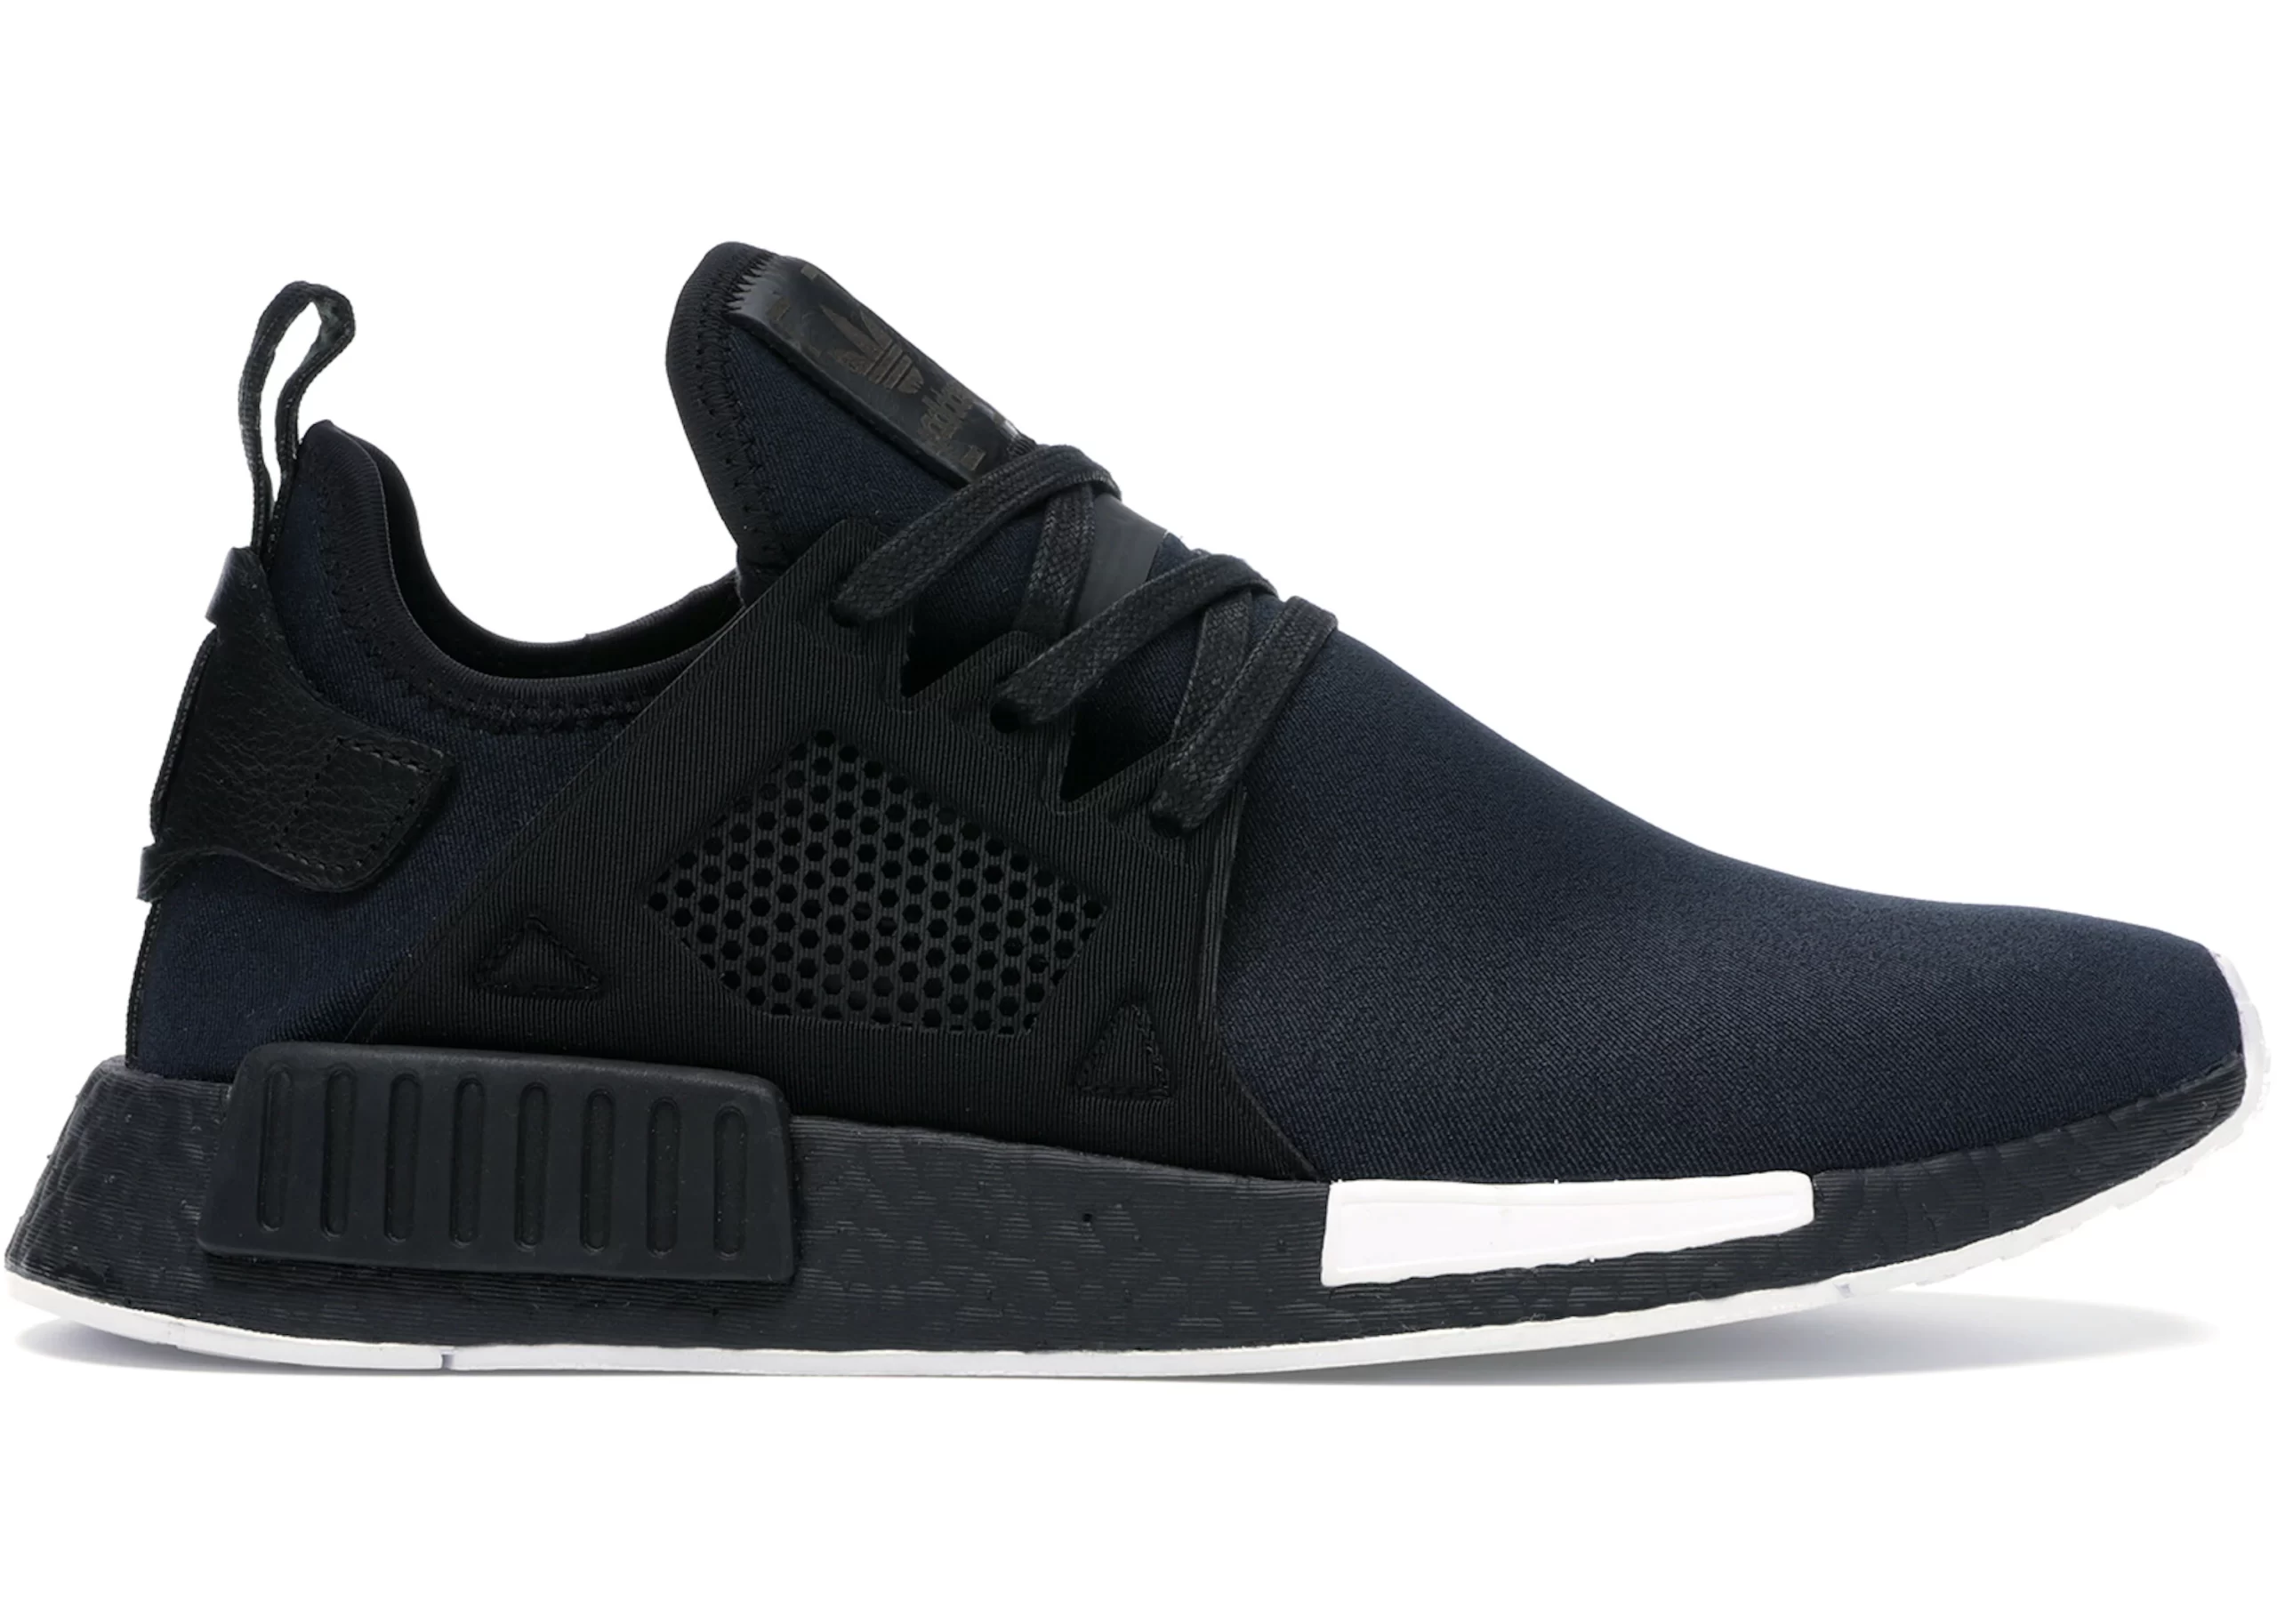 Adidas Nmd Xr1 Size Henry Poole